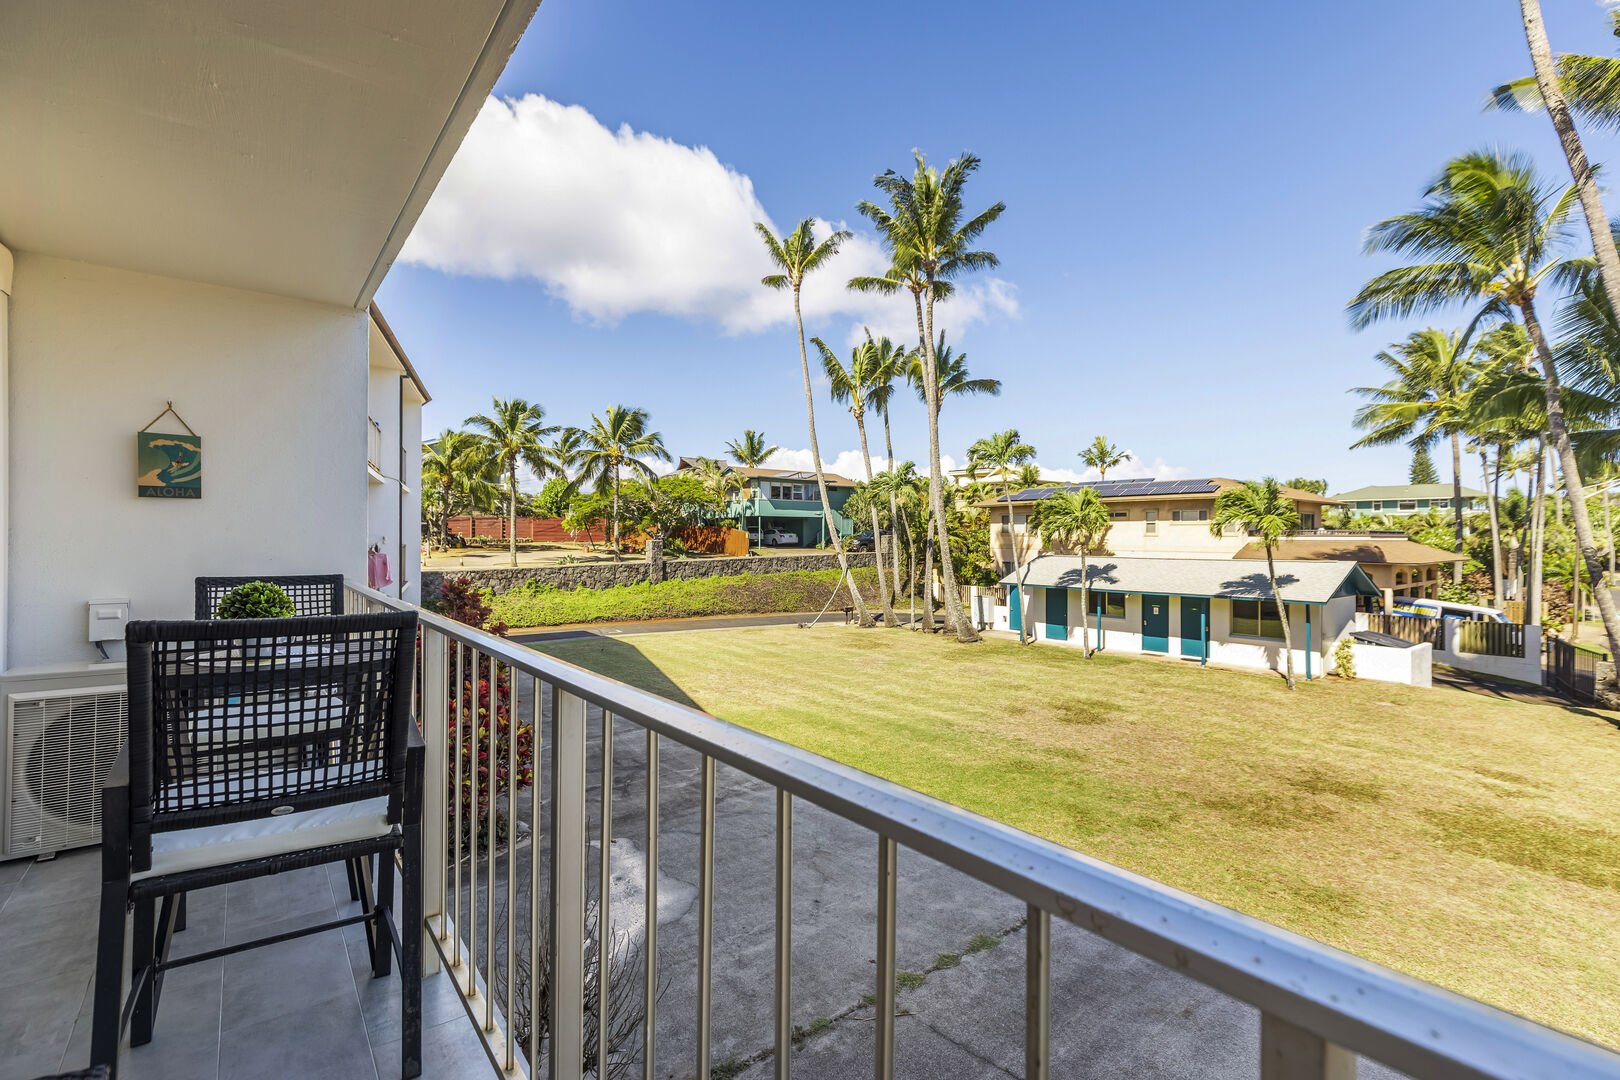 Balcony with views of the backyard of the building and Kuau Cove with many palm trees